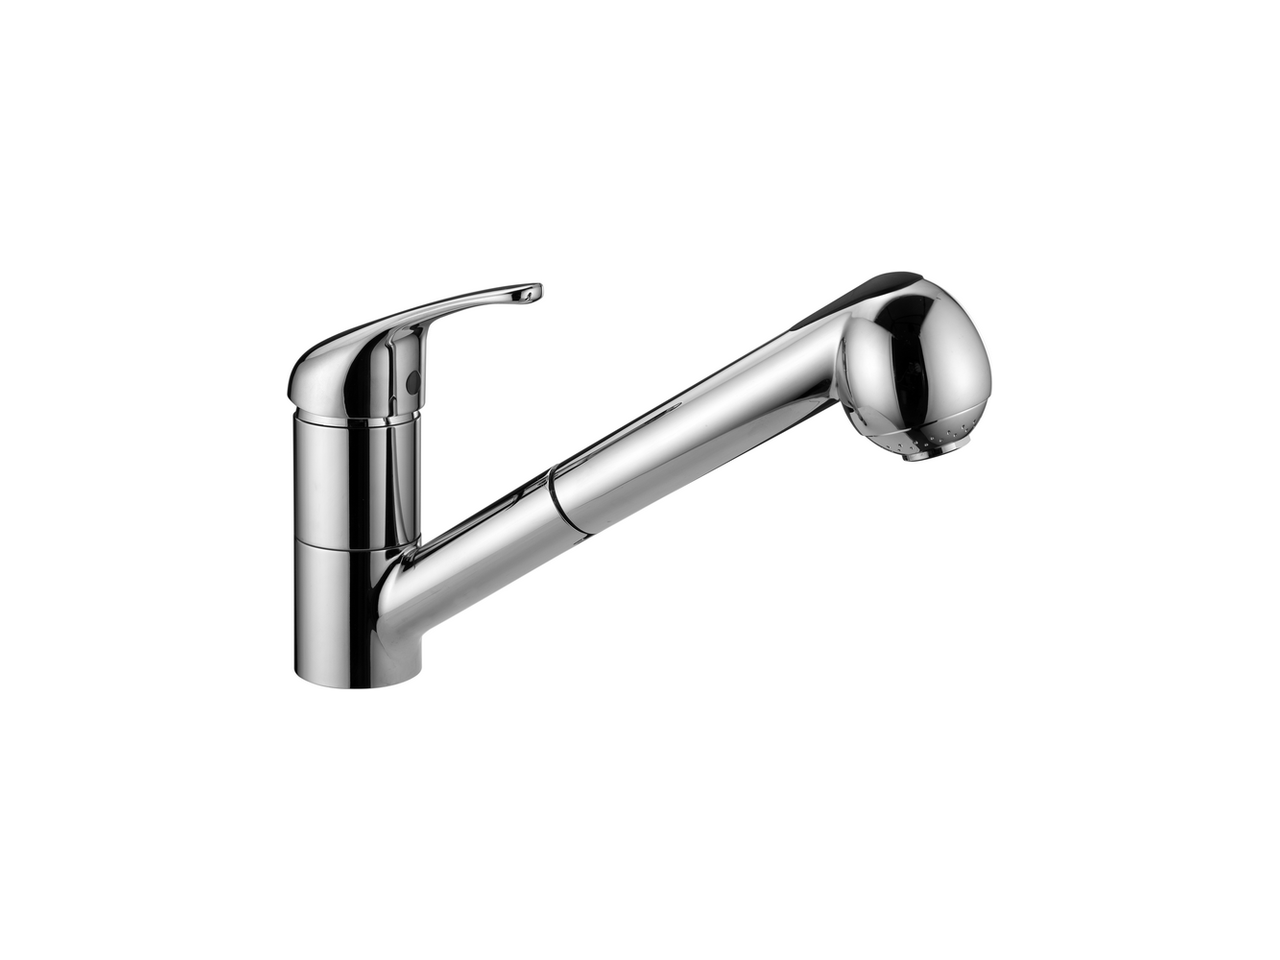 HUBERSingle lever sink mixer with pull out handspray KITCHEN